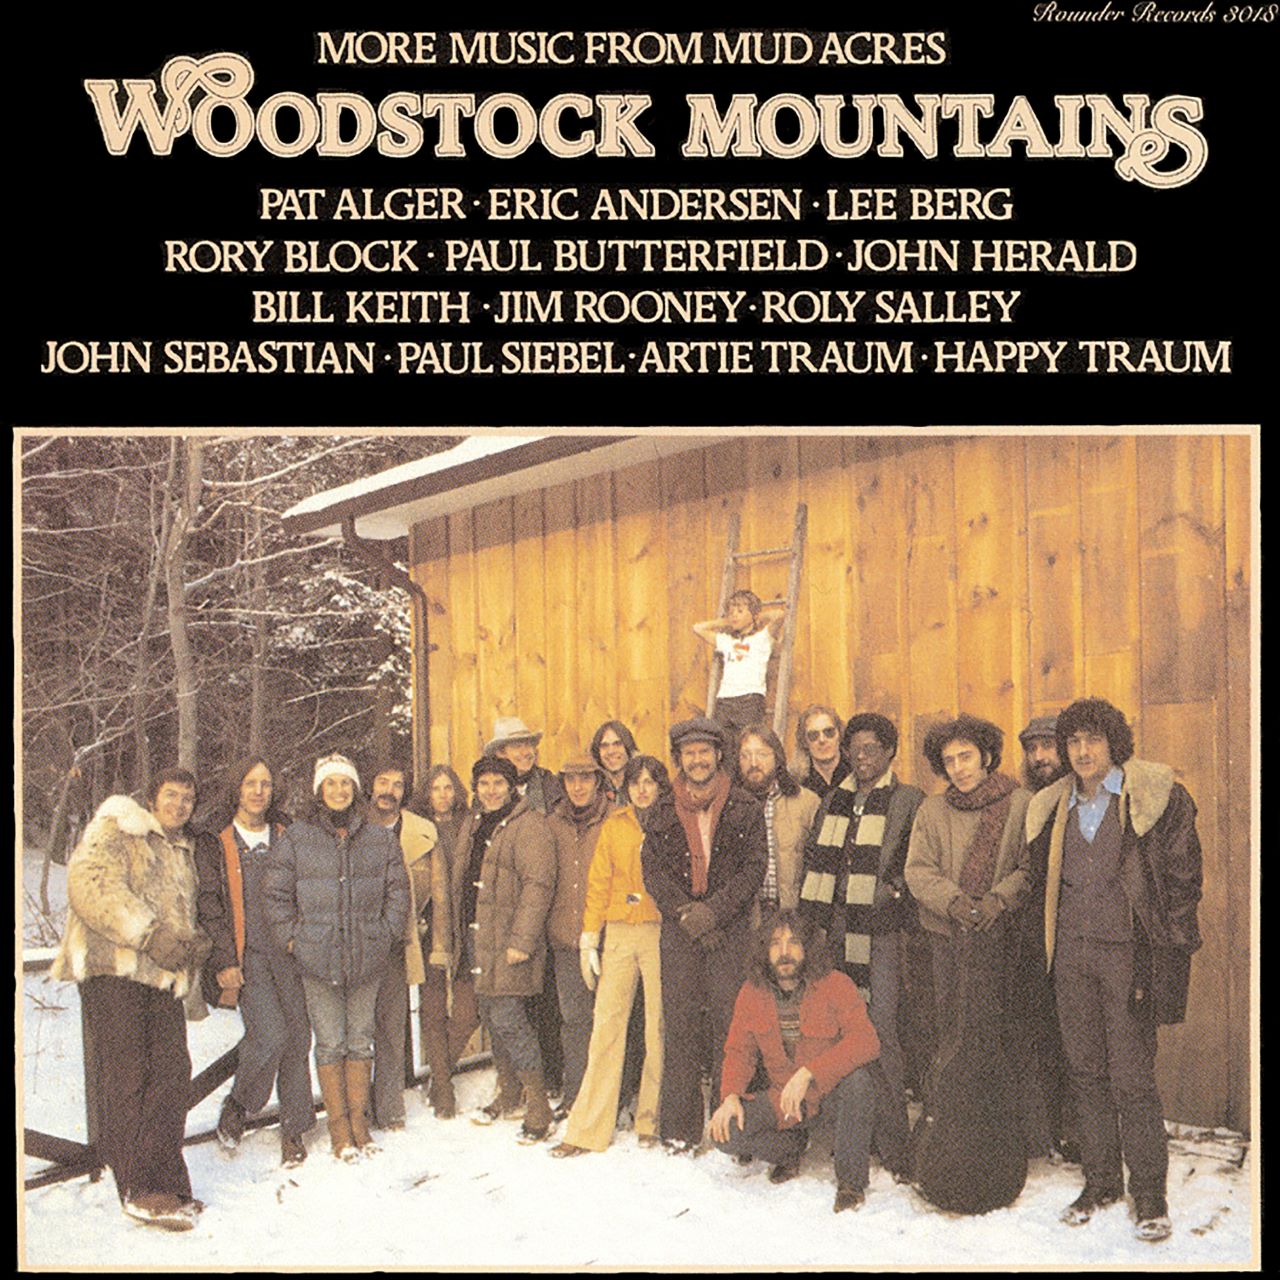 Woodstock Mountains Revue - Music From Mud Acres cover album